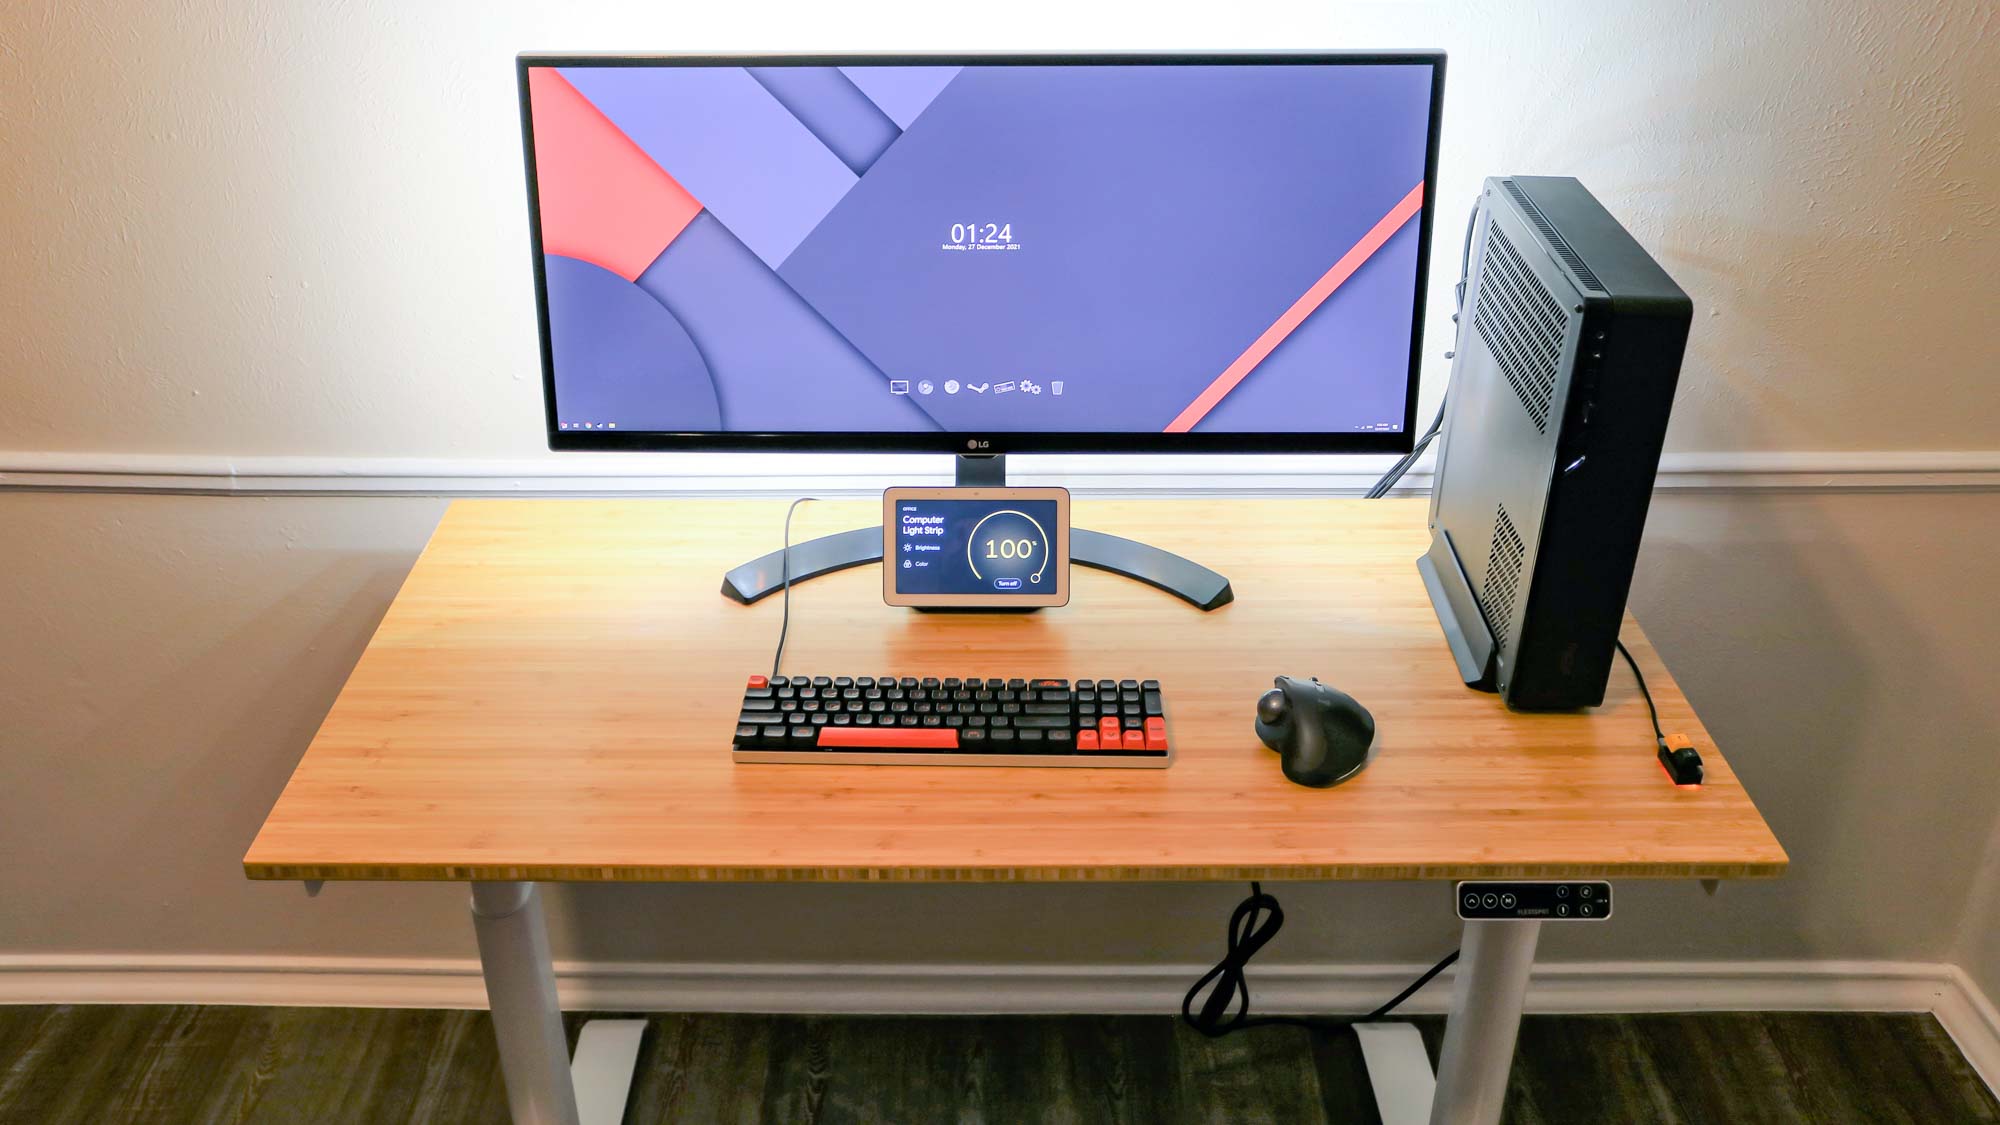 Top view of a standing desk with monitor and desktop computer